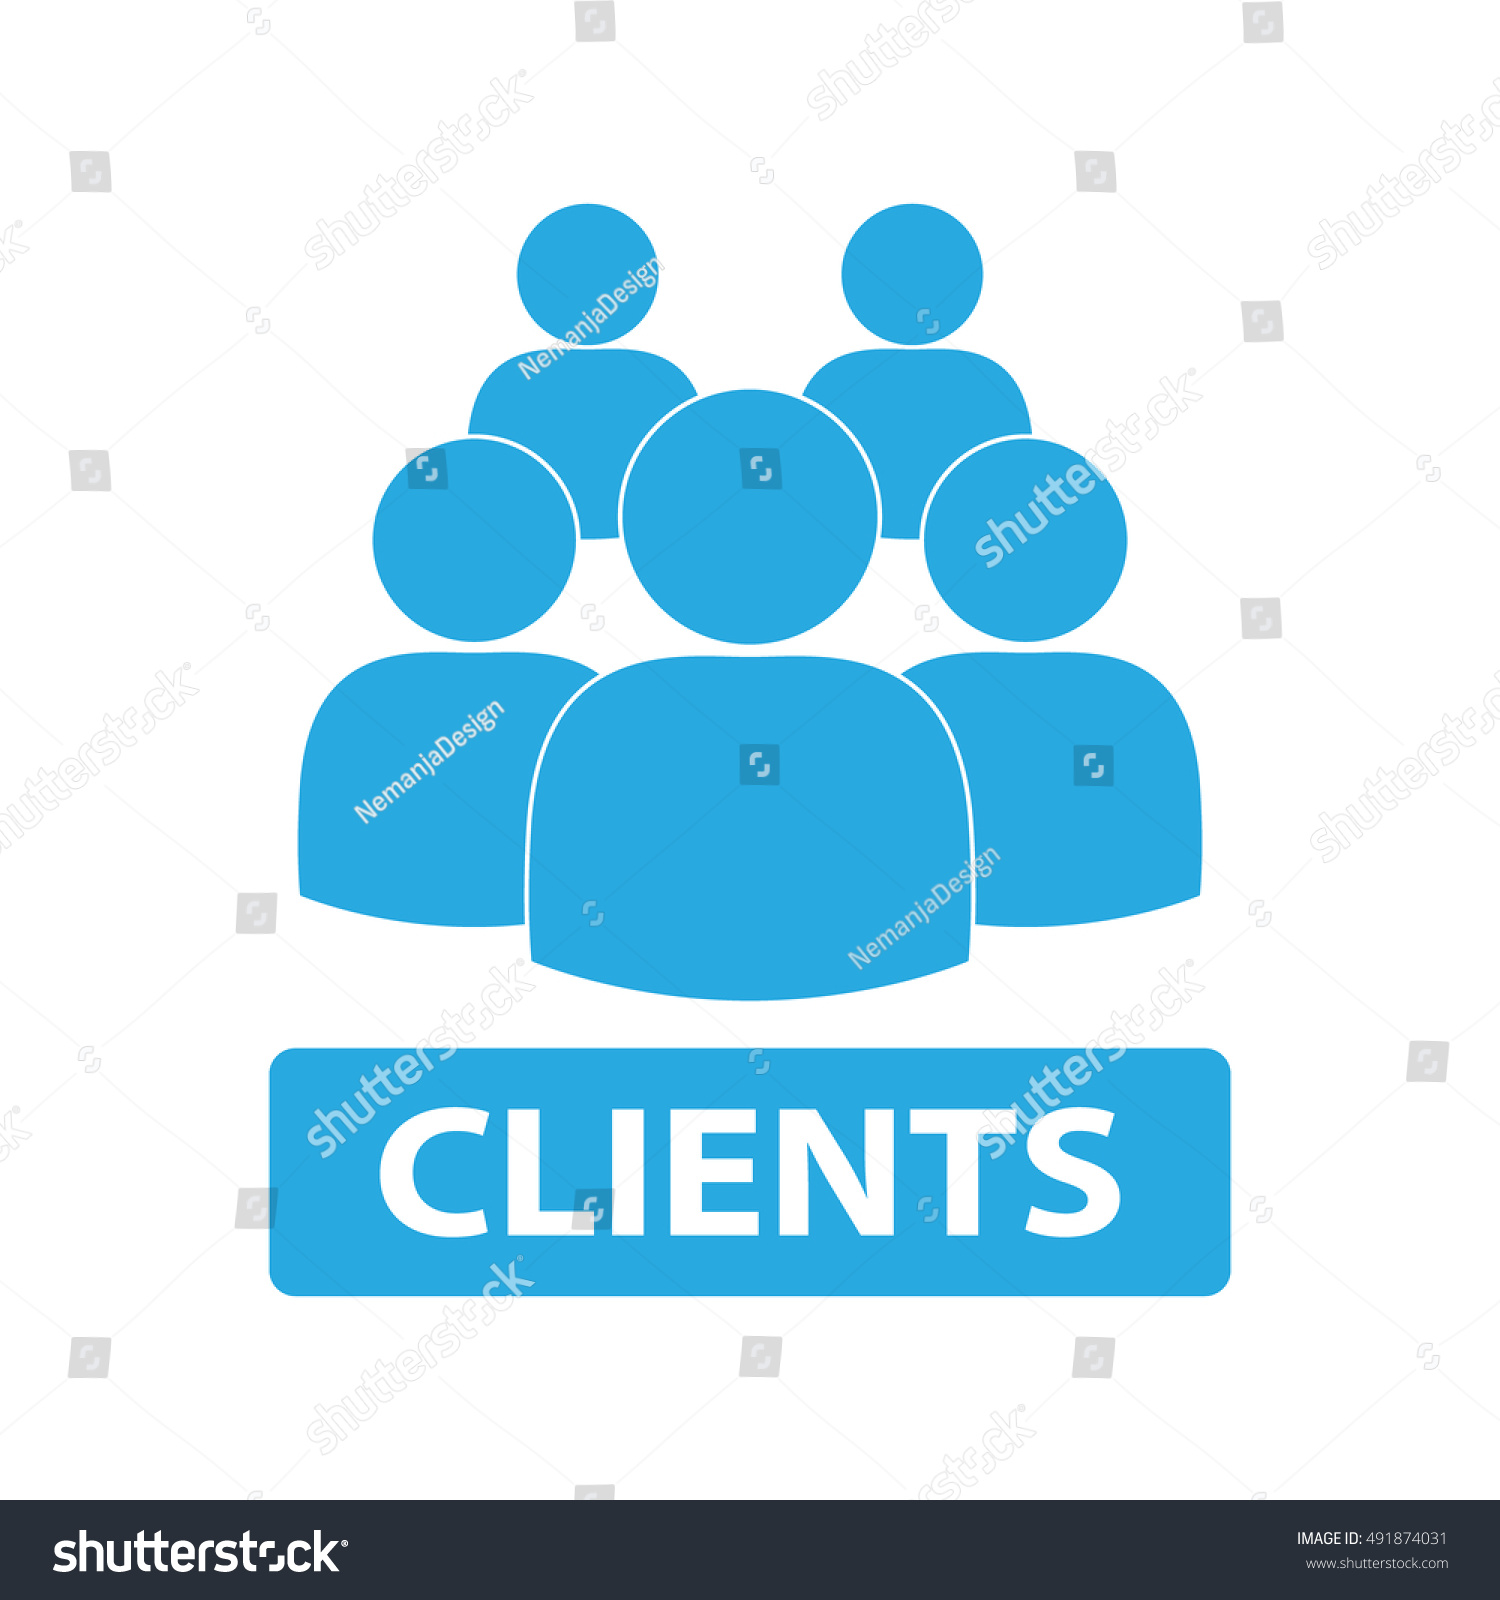 Clients Icon #491874031